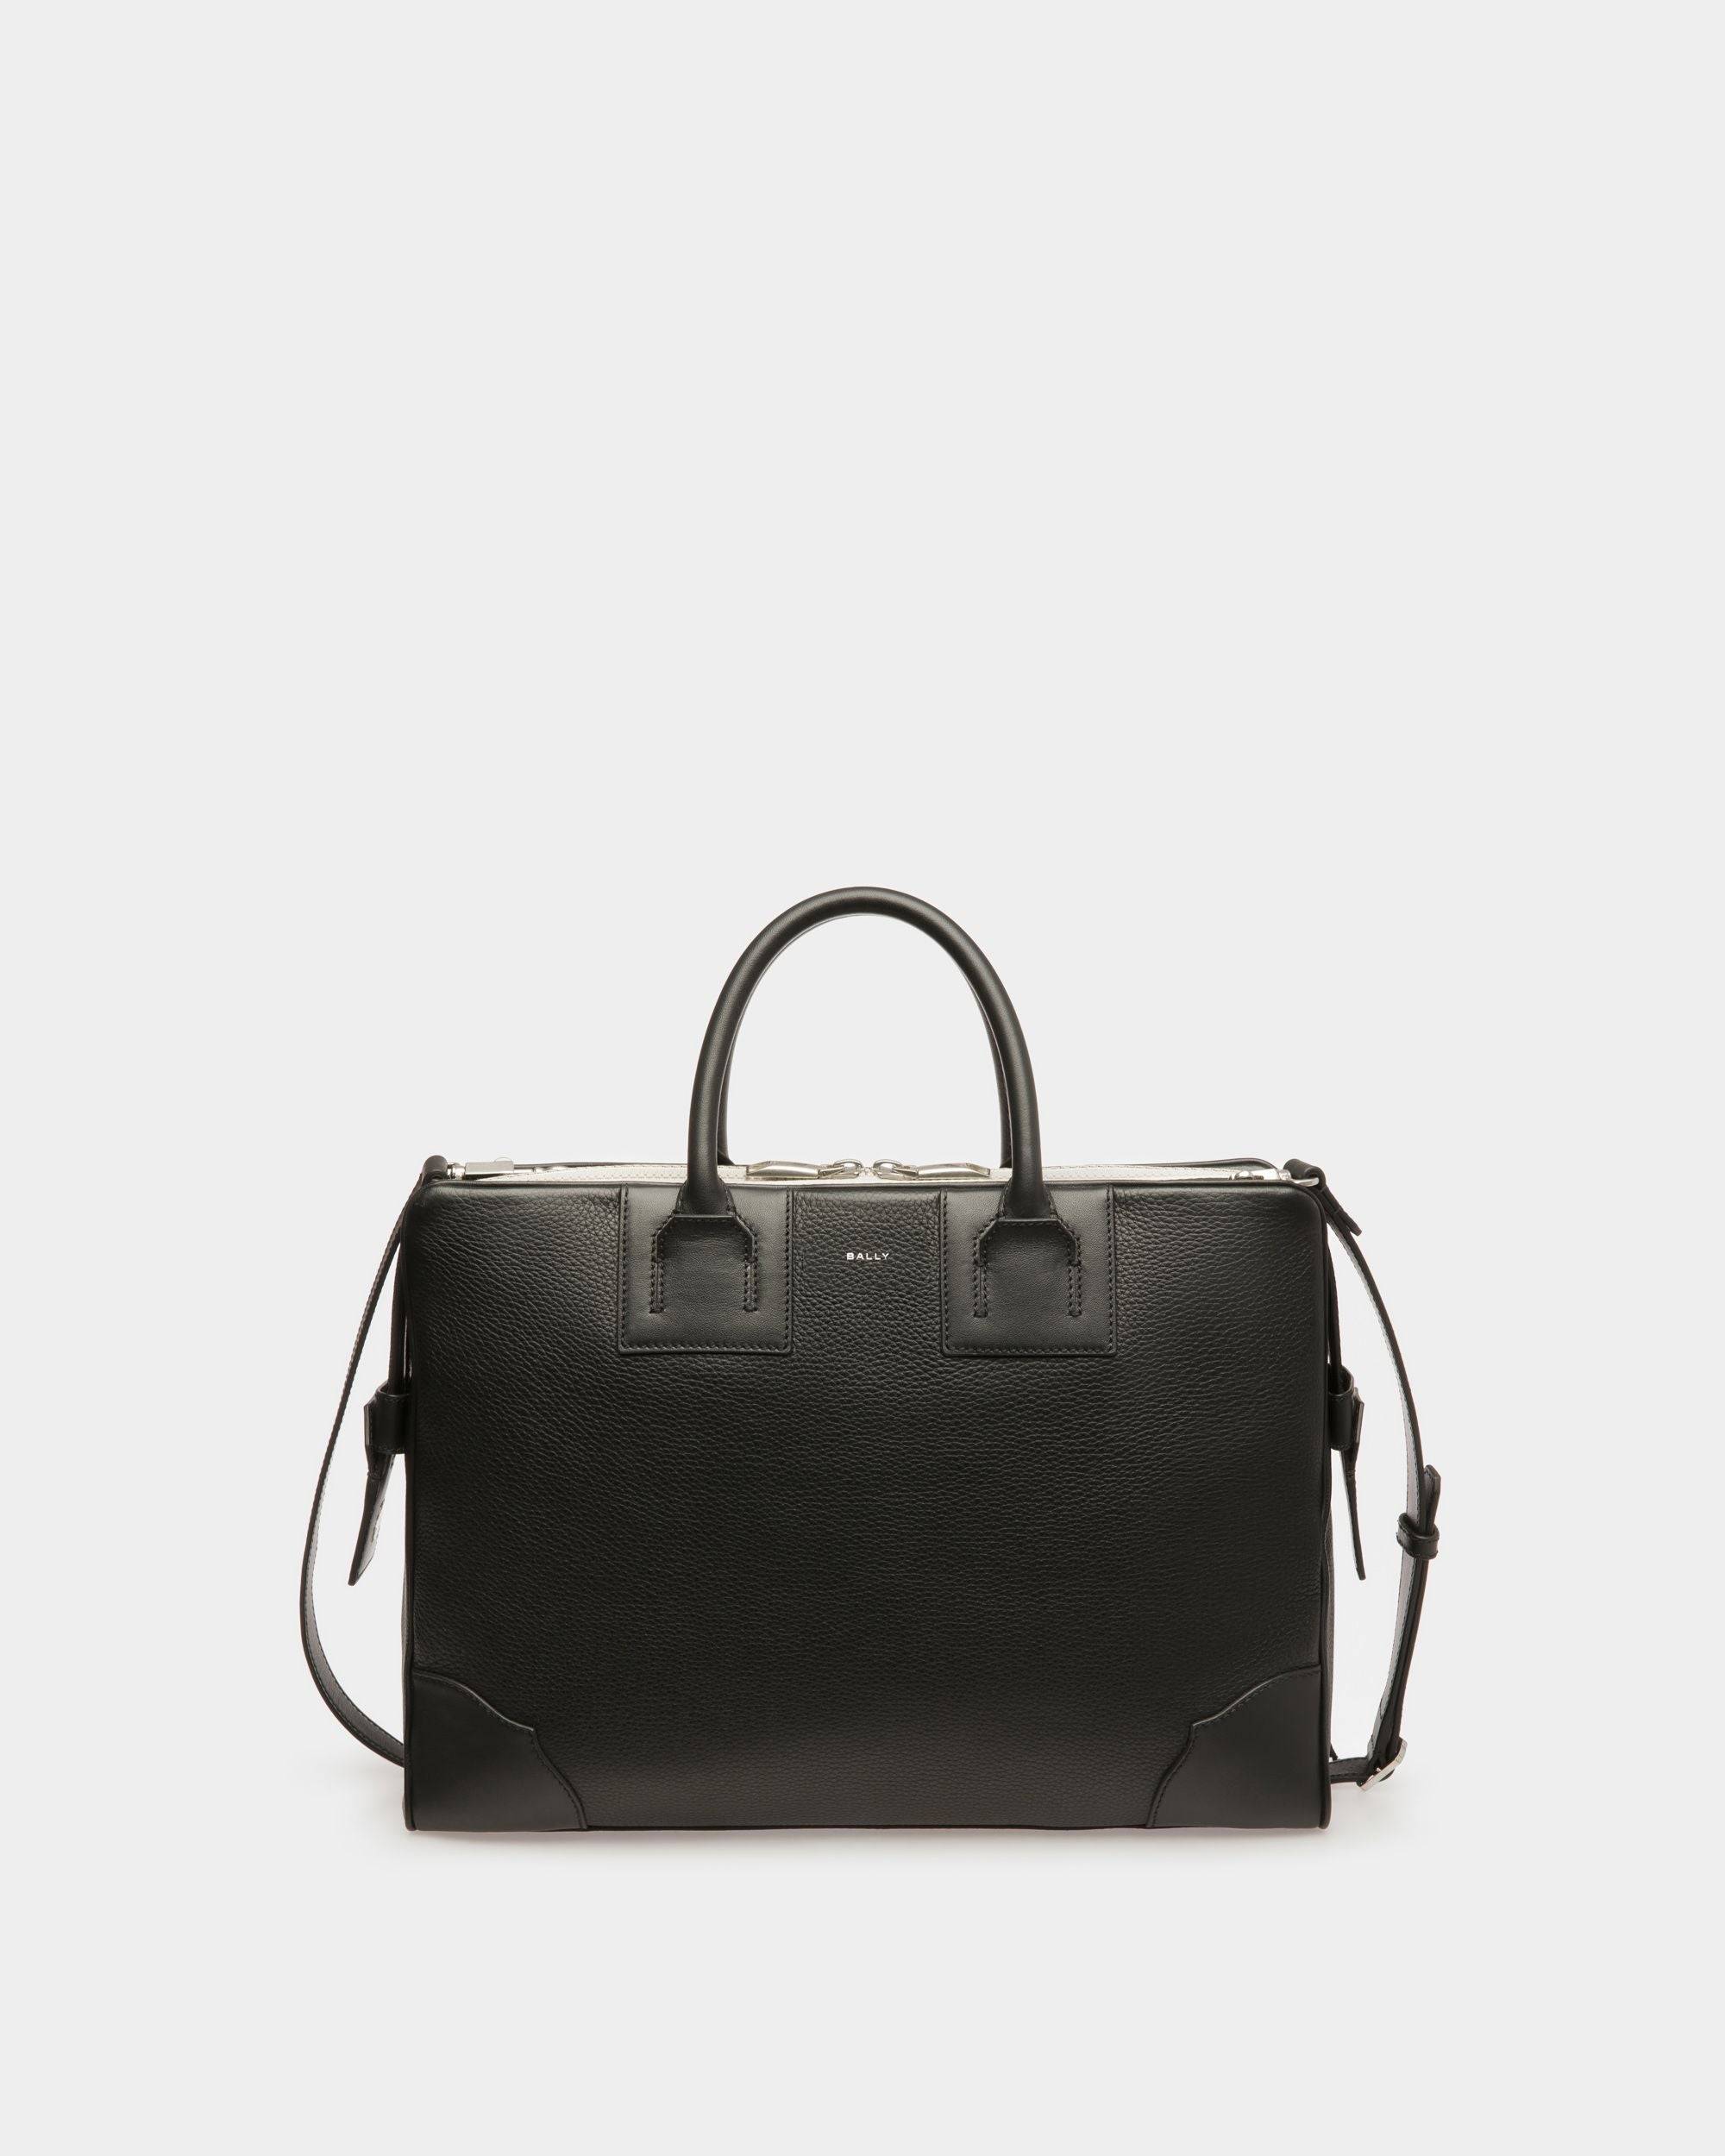 Bord Brief | Men's Business Bag | Black Leather | Bally | Still Life Front